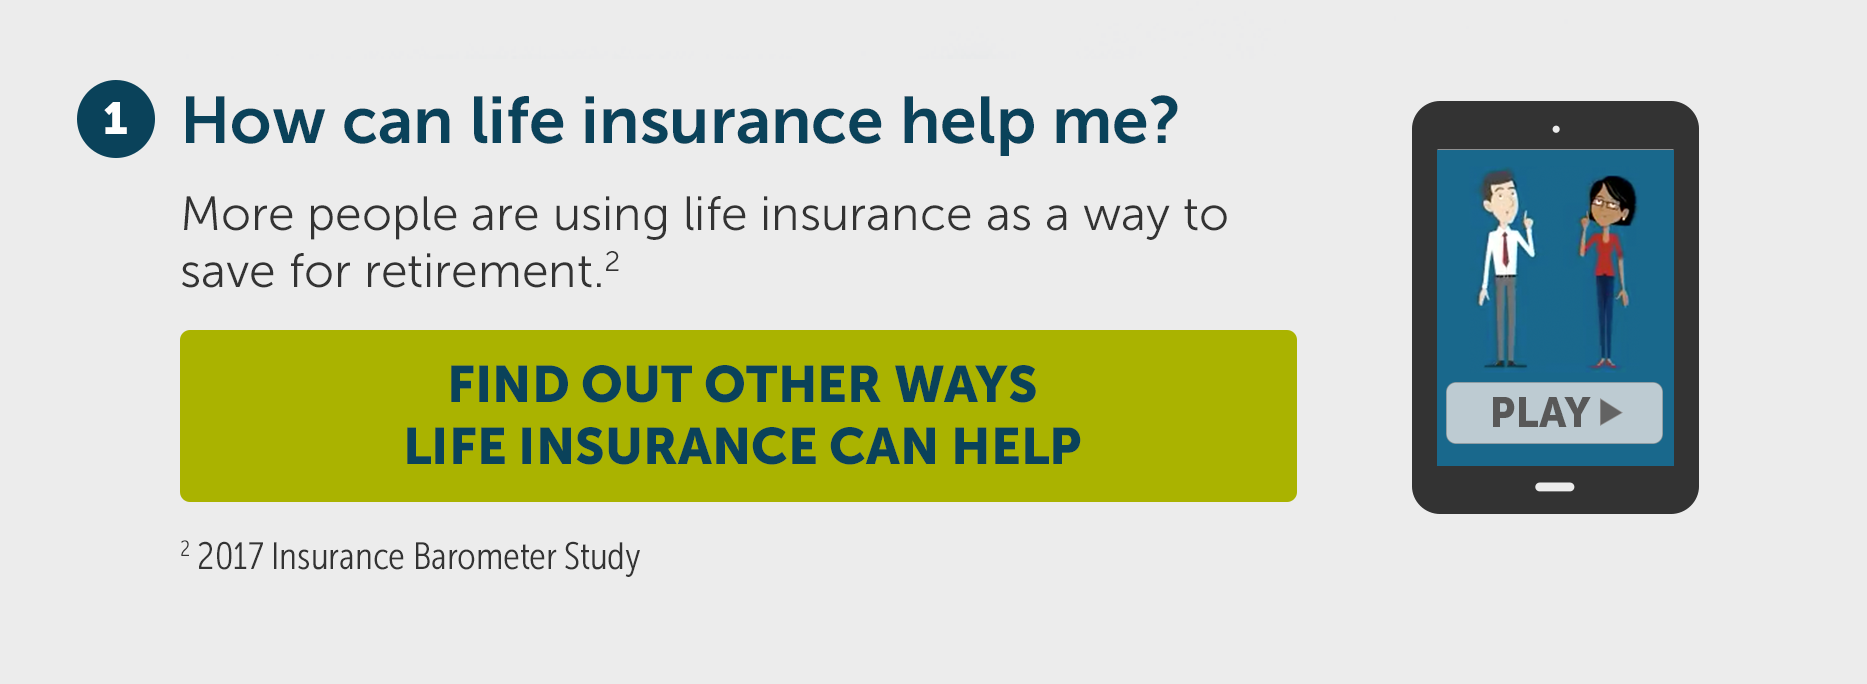 How can life insurnace help me?